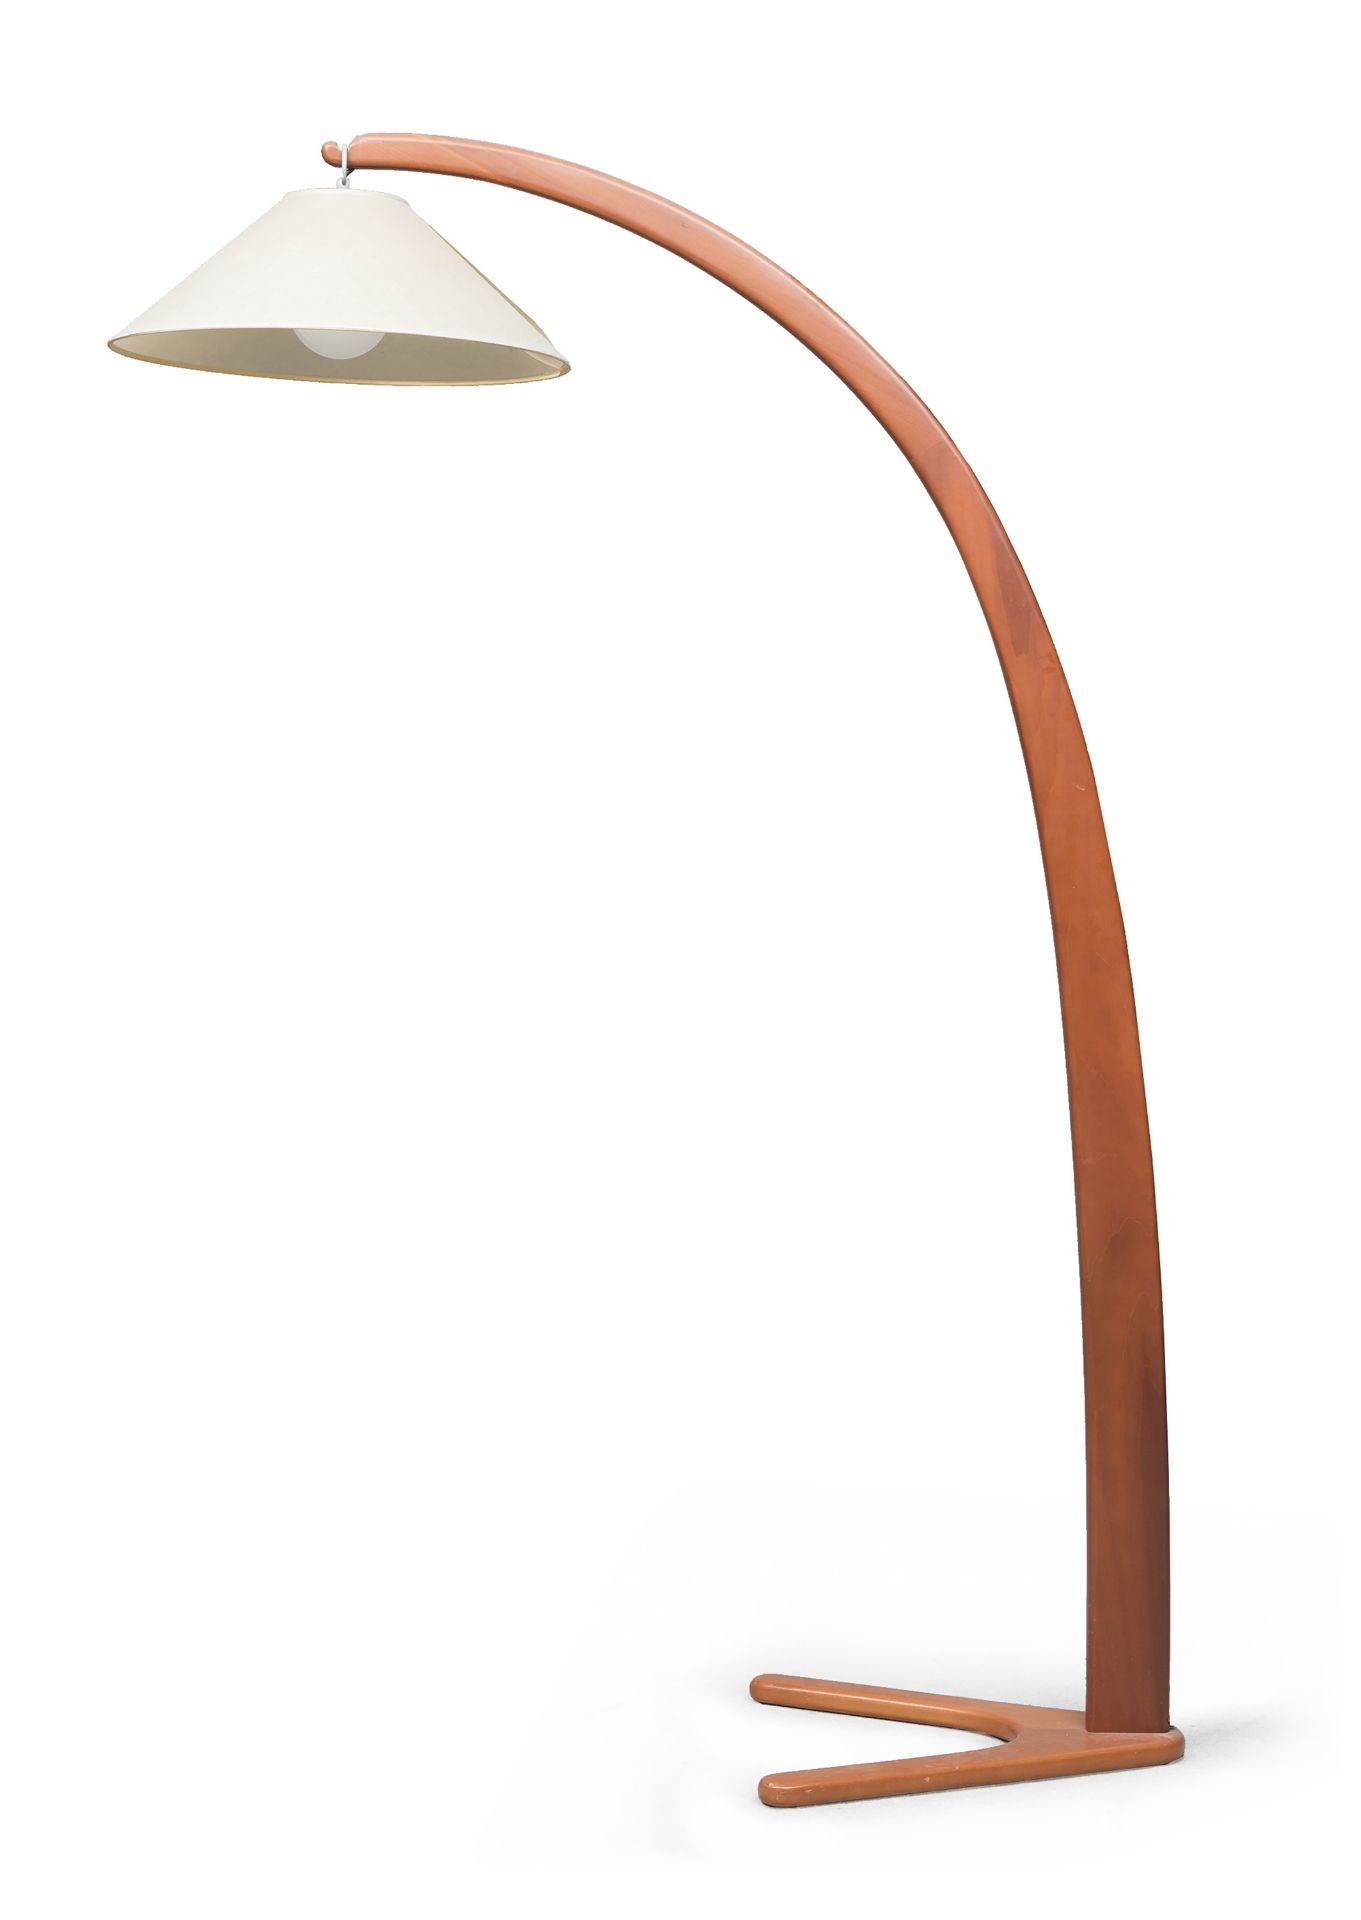 ARCHED BEECH LAMP 1970s